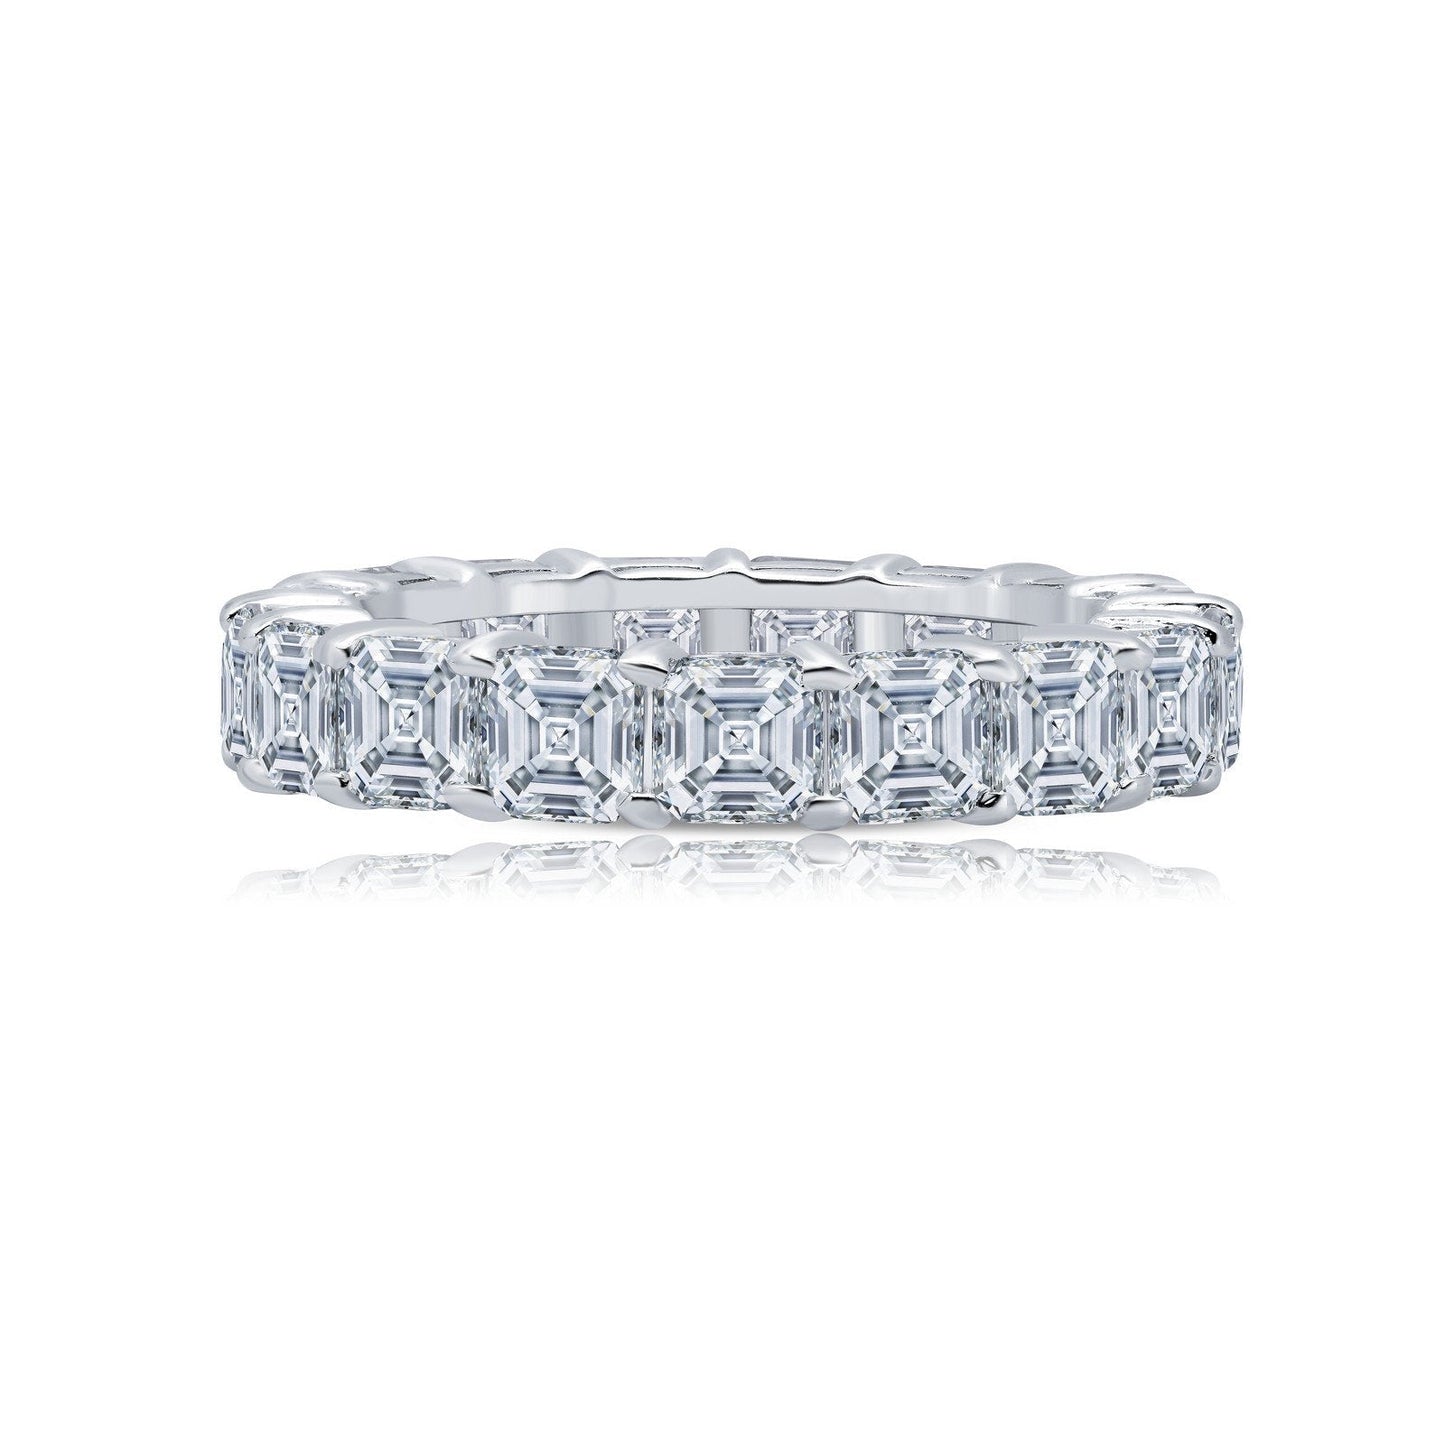 Lafonn 6.63 CTW Anniversary Eternity Band Simulated Diamond RINGS Size 8 Platinum 6.63 CTS Approx. 4mm (W)